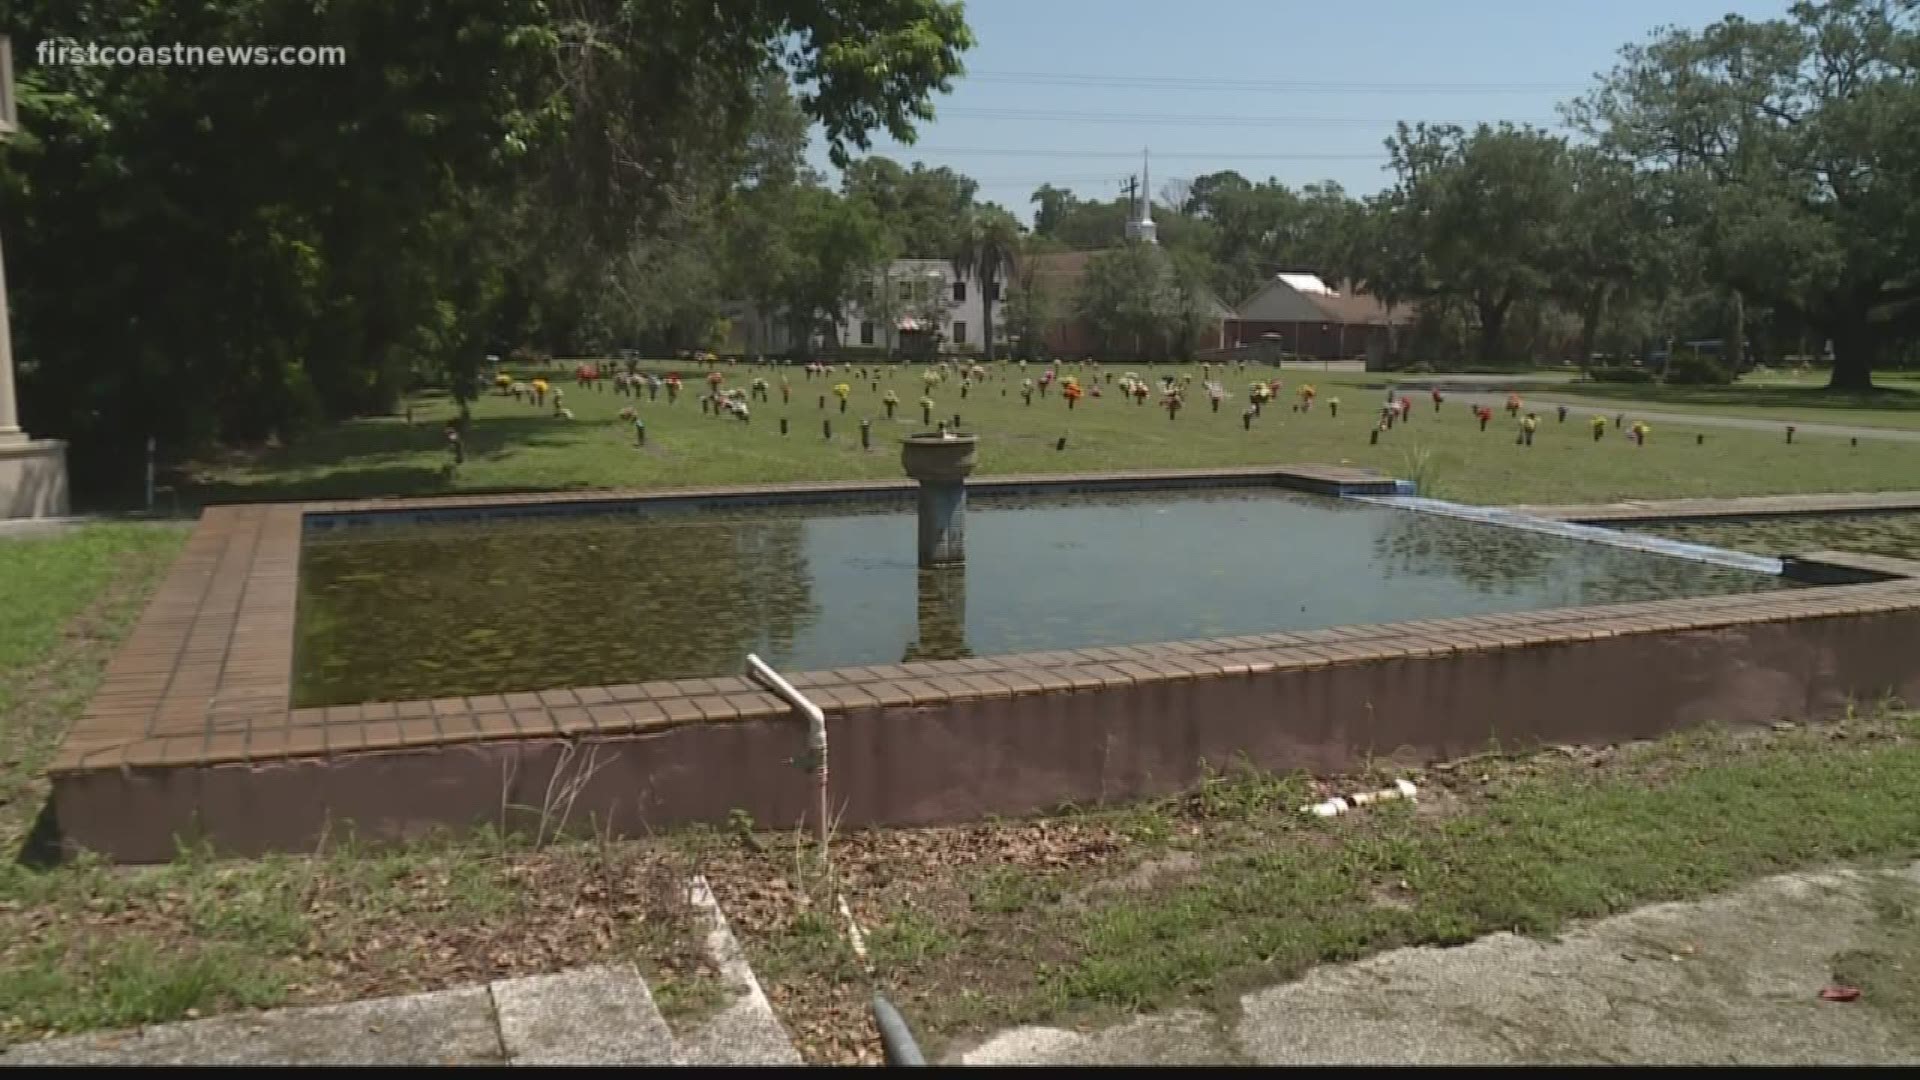 A Jacksonville woman says she's been waiting years for a fountain at one of Jacksonville's oldest and largest cemetery's to get fixed. She feels it's disrespectful to her loved one buried at Evergreen Cemetery.